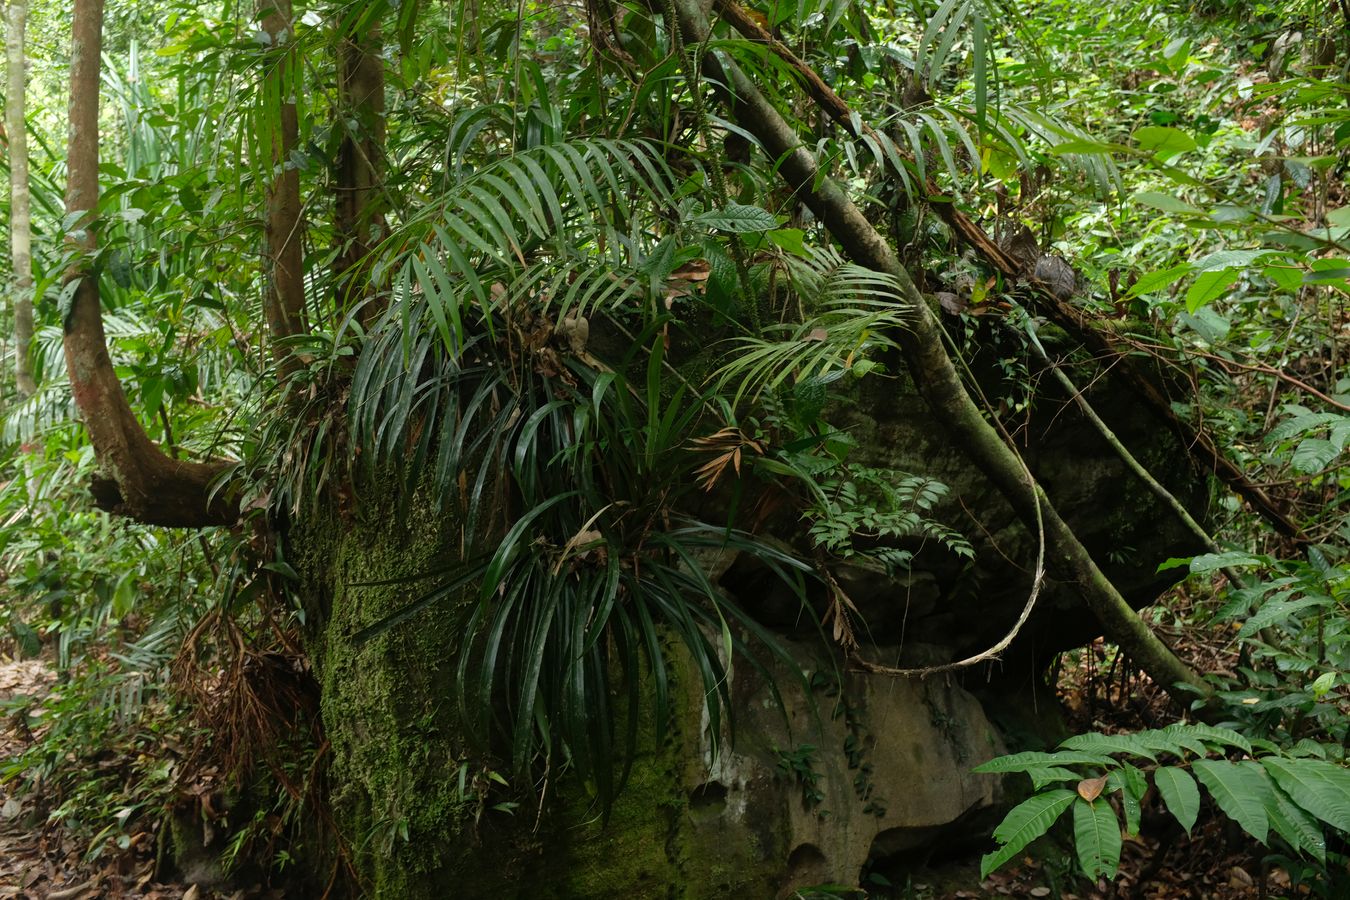 Variety of Vegetation Grows on a Rock in the Rainforest 